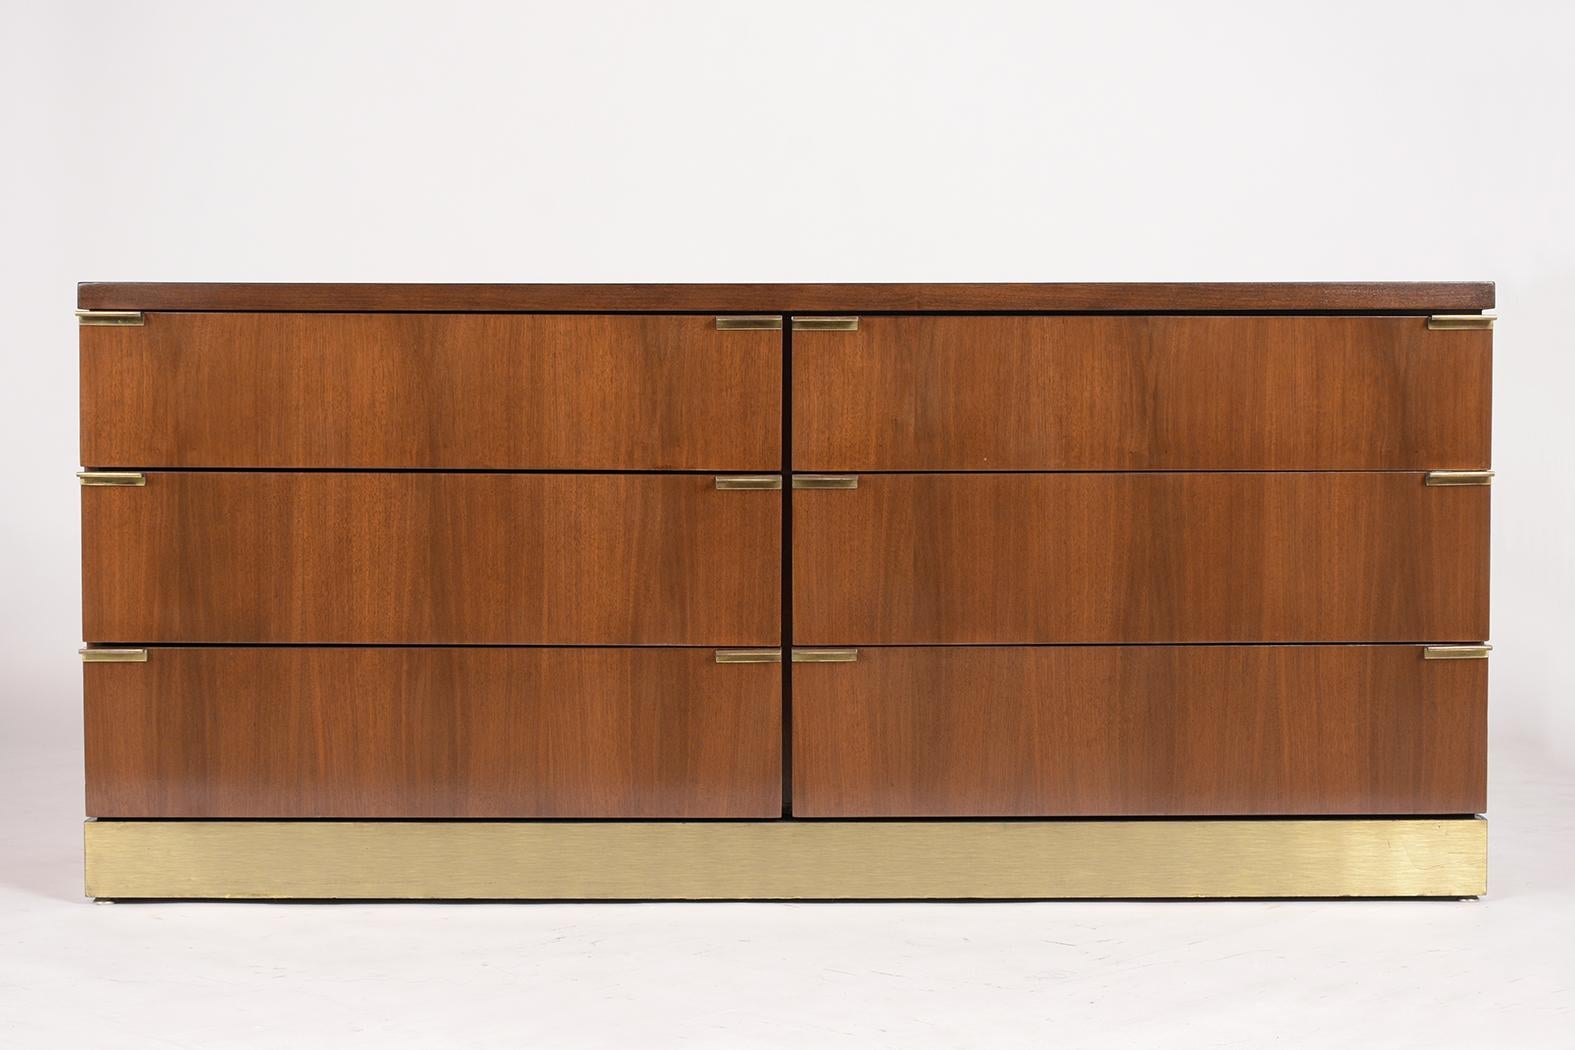 This Mid Century style Credenza by Glenn of California has been professionally restored and newly stained in a dark walnut color with a semi-gloss lacquered finish. The credenza has six large drawers each with two brass pull handles on each side,